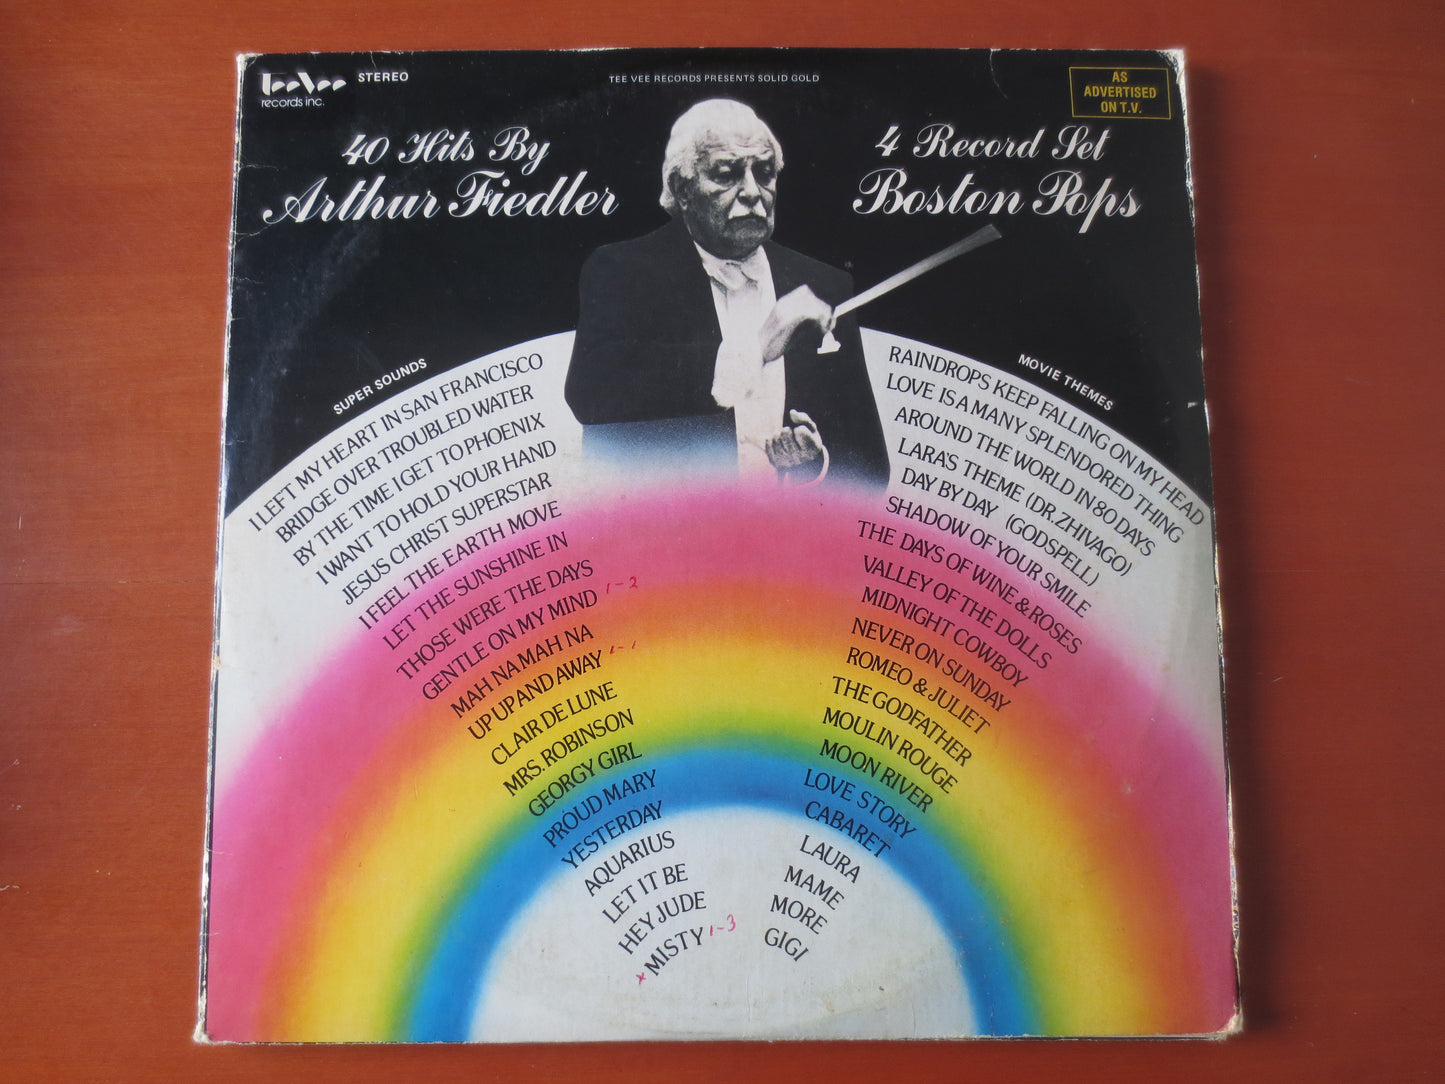 ARTHUR FIEDLER, With the Boston Pops Orchestra, 4 Classical Albums, Jazz Records, Vintage Vinyl, Record Vinyl, 1973 Records